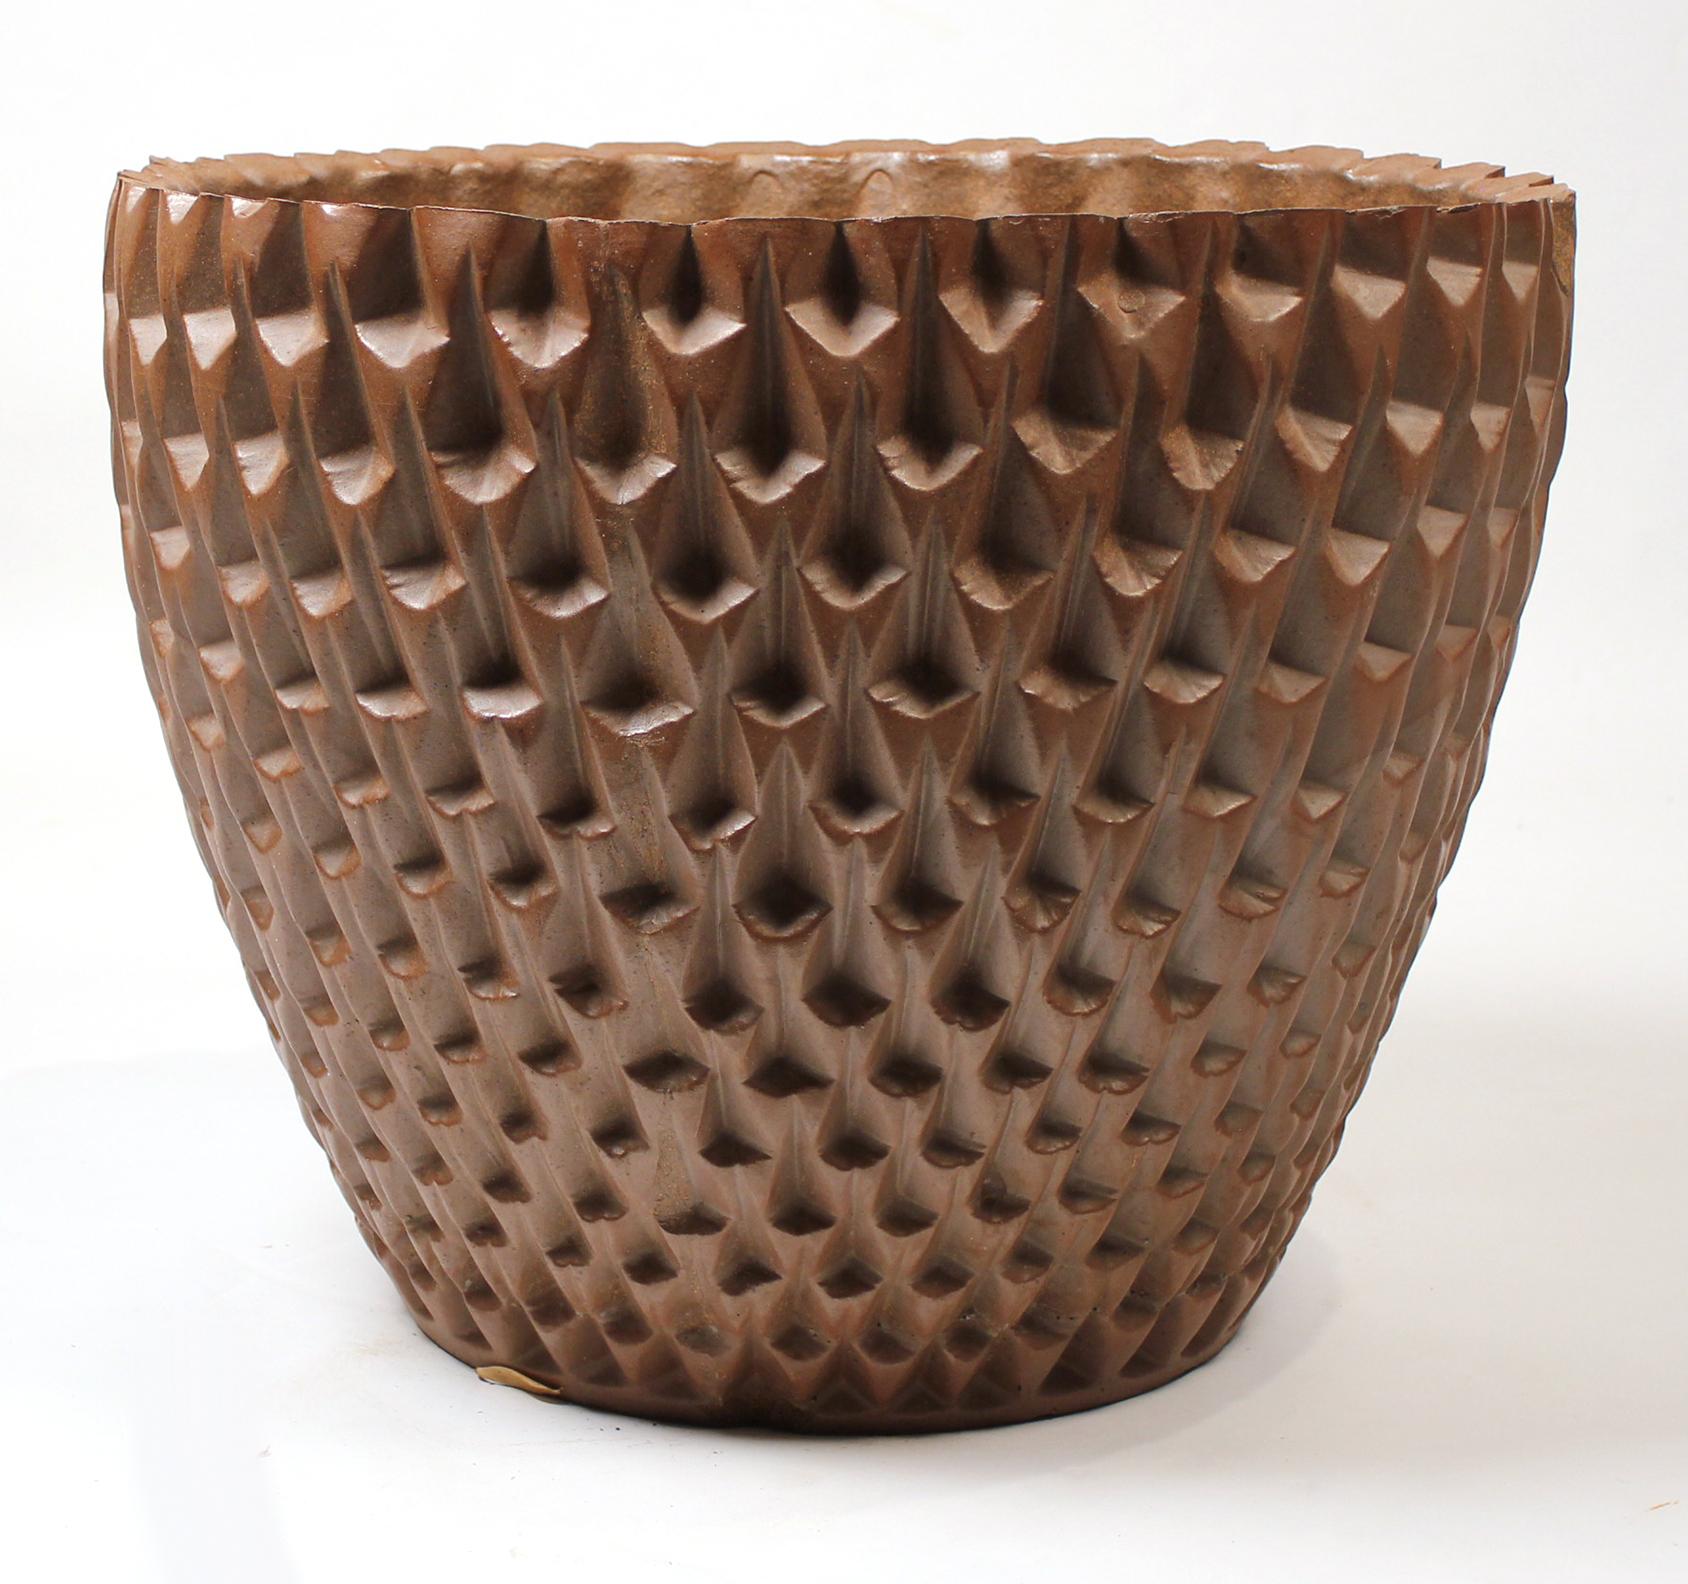 Massive 1960s David Cressey designed unglazed 'Phoenix' stoneware vessel from the Pro-Artisan Series for Architectural Pottery. This example is sometimes referred to as the 'pineapple' planter and is one of my personal favorites.